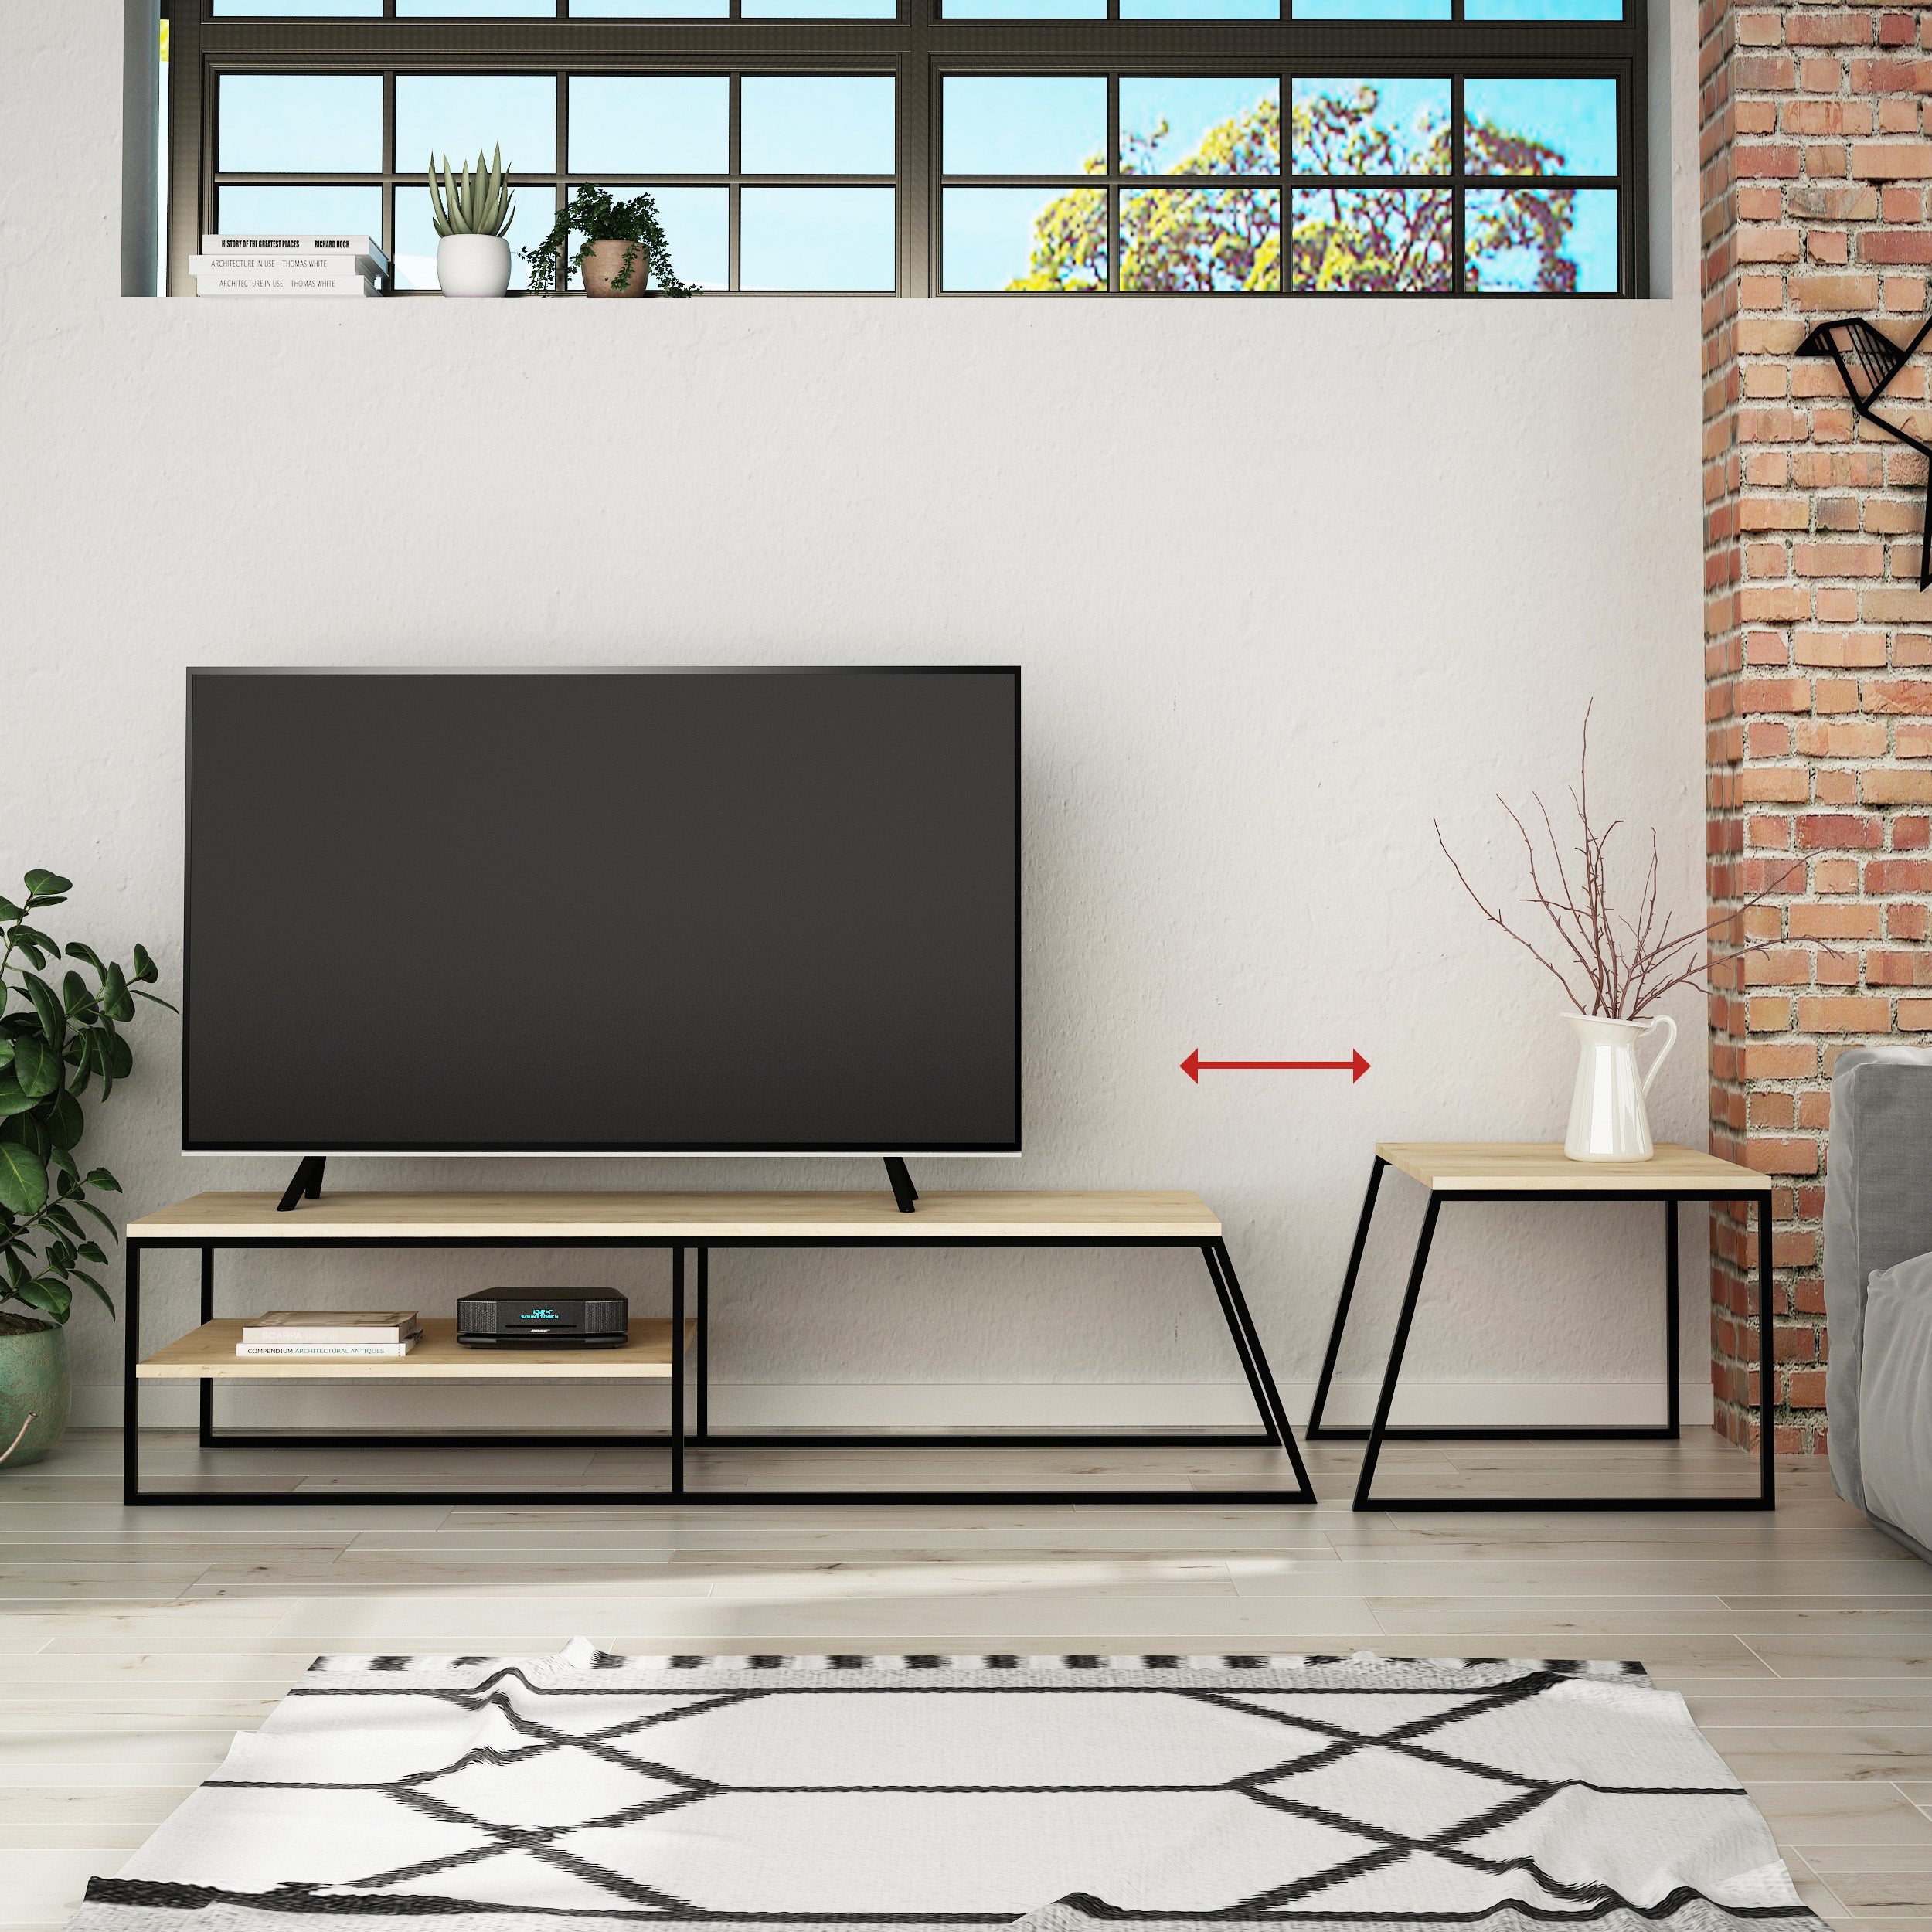 Pal Modern TV Stand Multimedia Centre With Storage Cabinet 163cm - Decortie